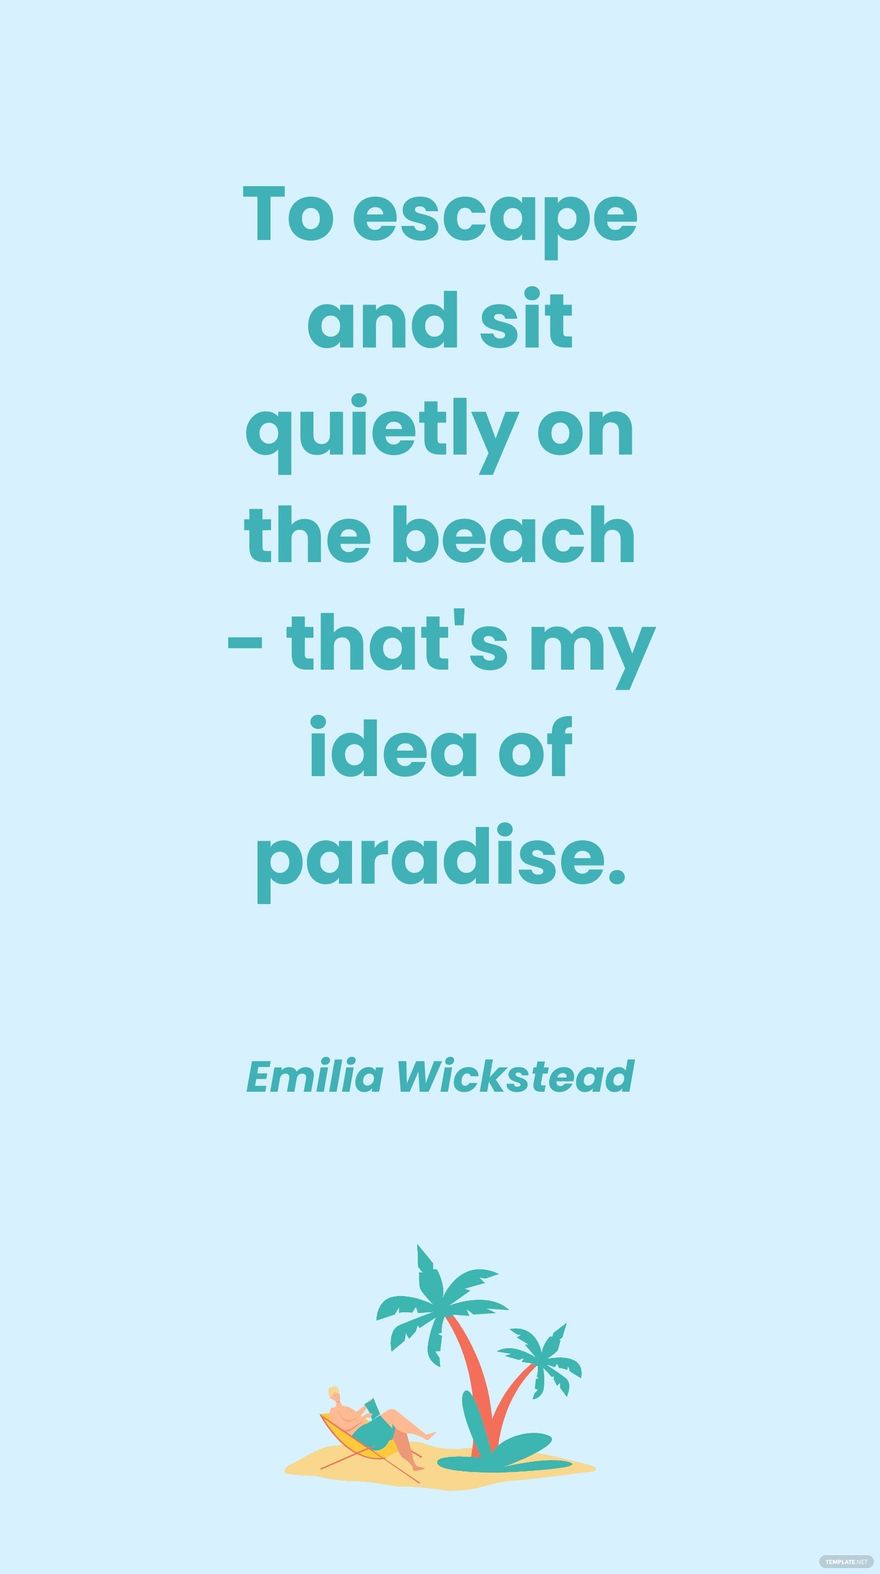 Emilia Wickstead - To escape and sit quietly on the beach - that's my idea of paradise. in JPG